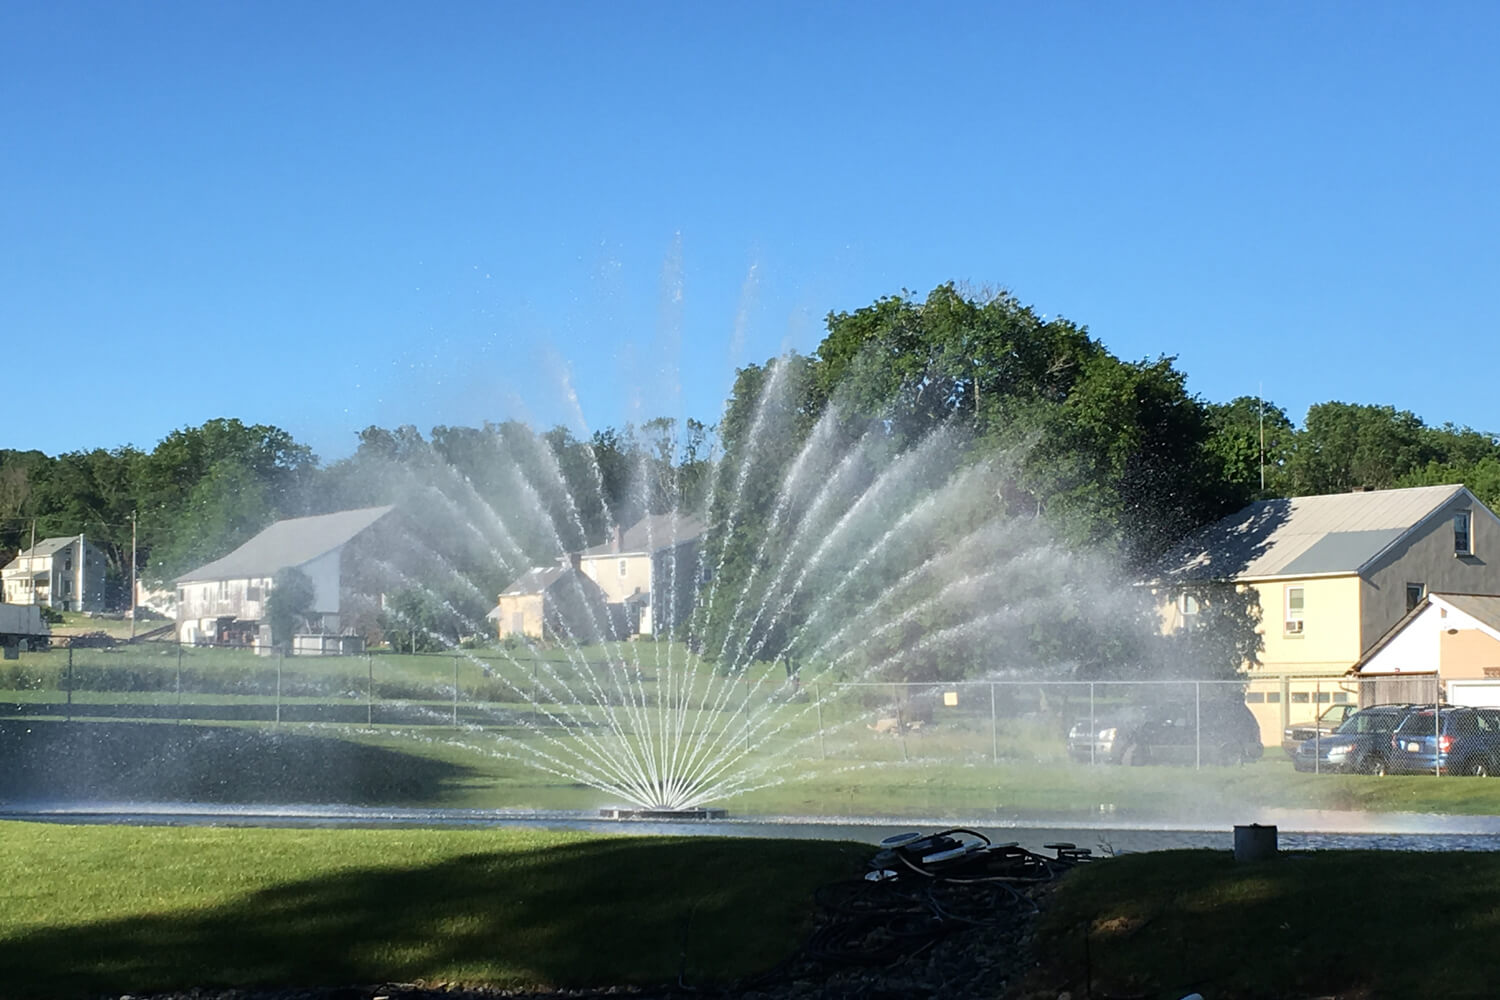 One of Otterbine's Aries Aerating Fountains in a residential area